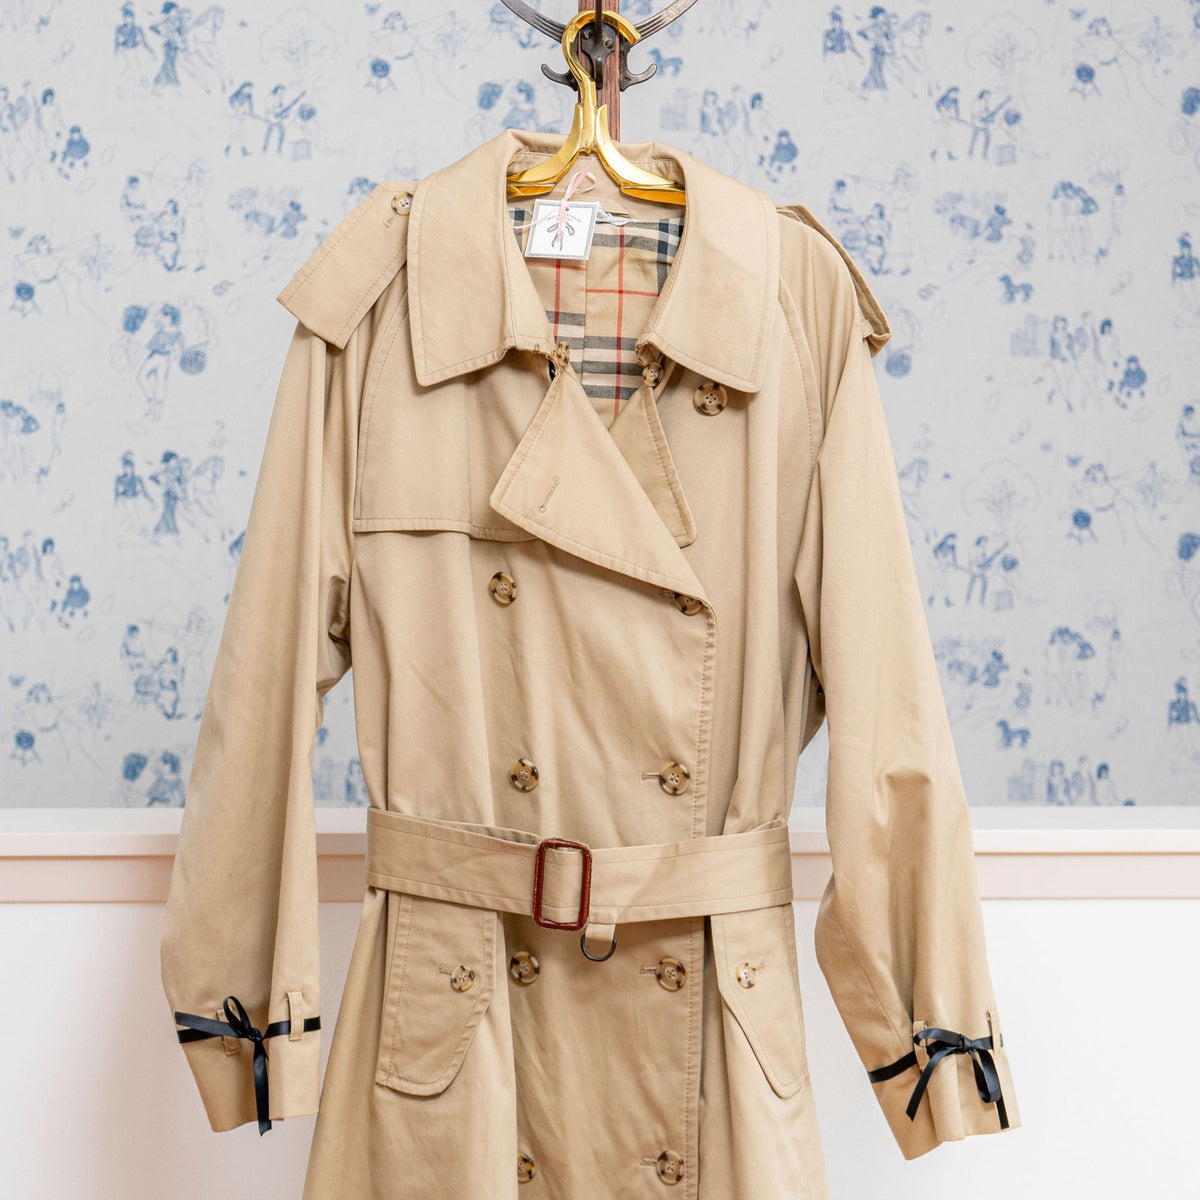 Classic Vintage 1980s Trench Coat with Plaid Lining and Belt – GOLDEN RULE  GALLERY